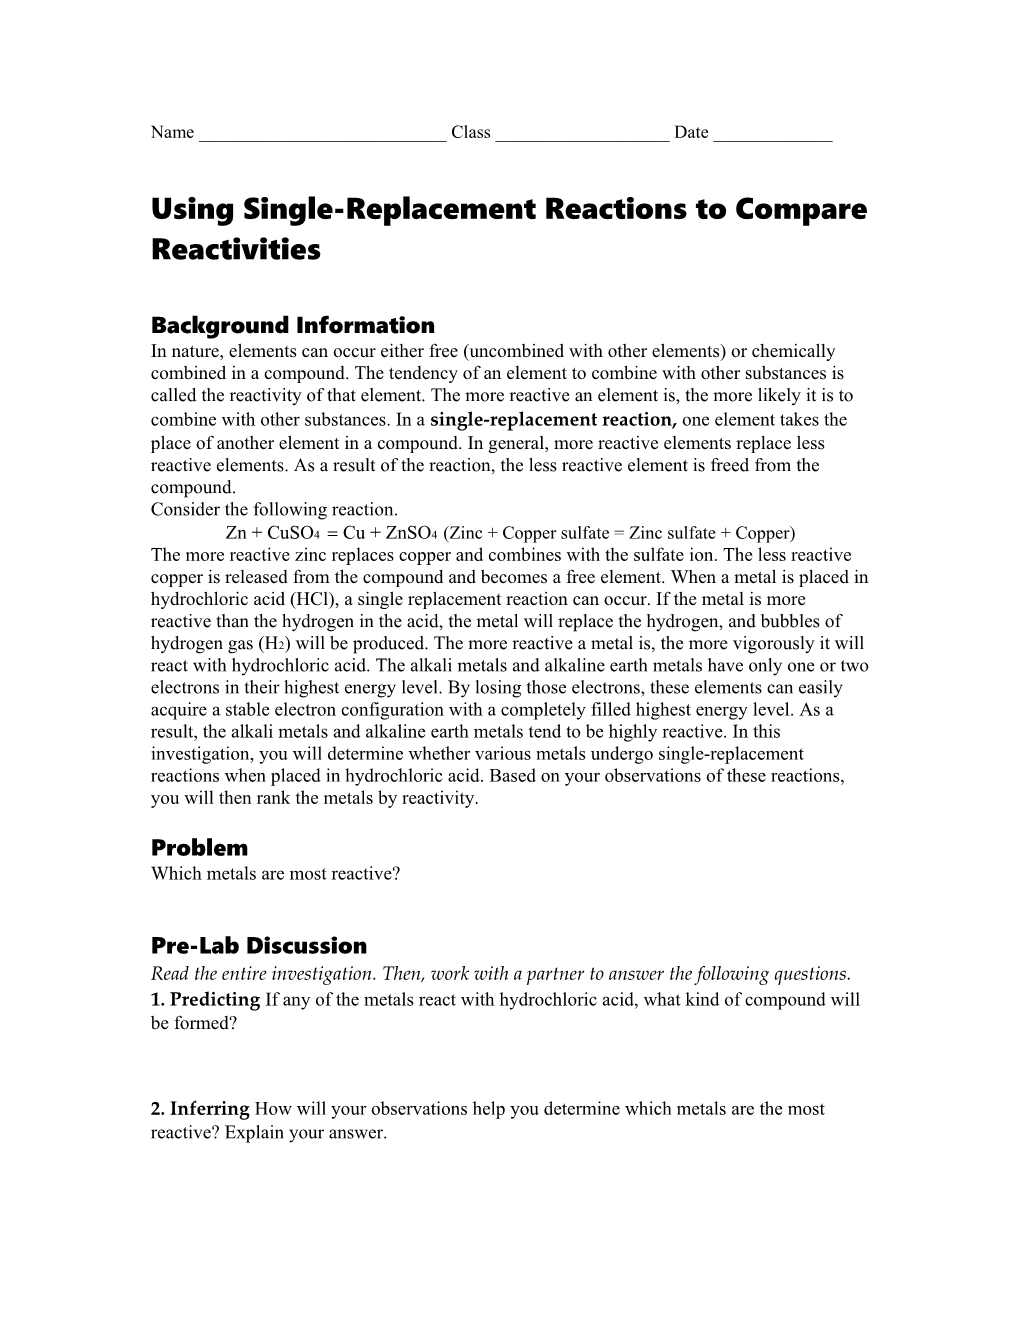 Using Single-Replacement Reactions to Compare Reactivities